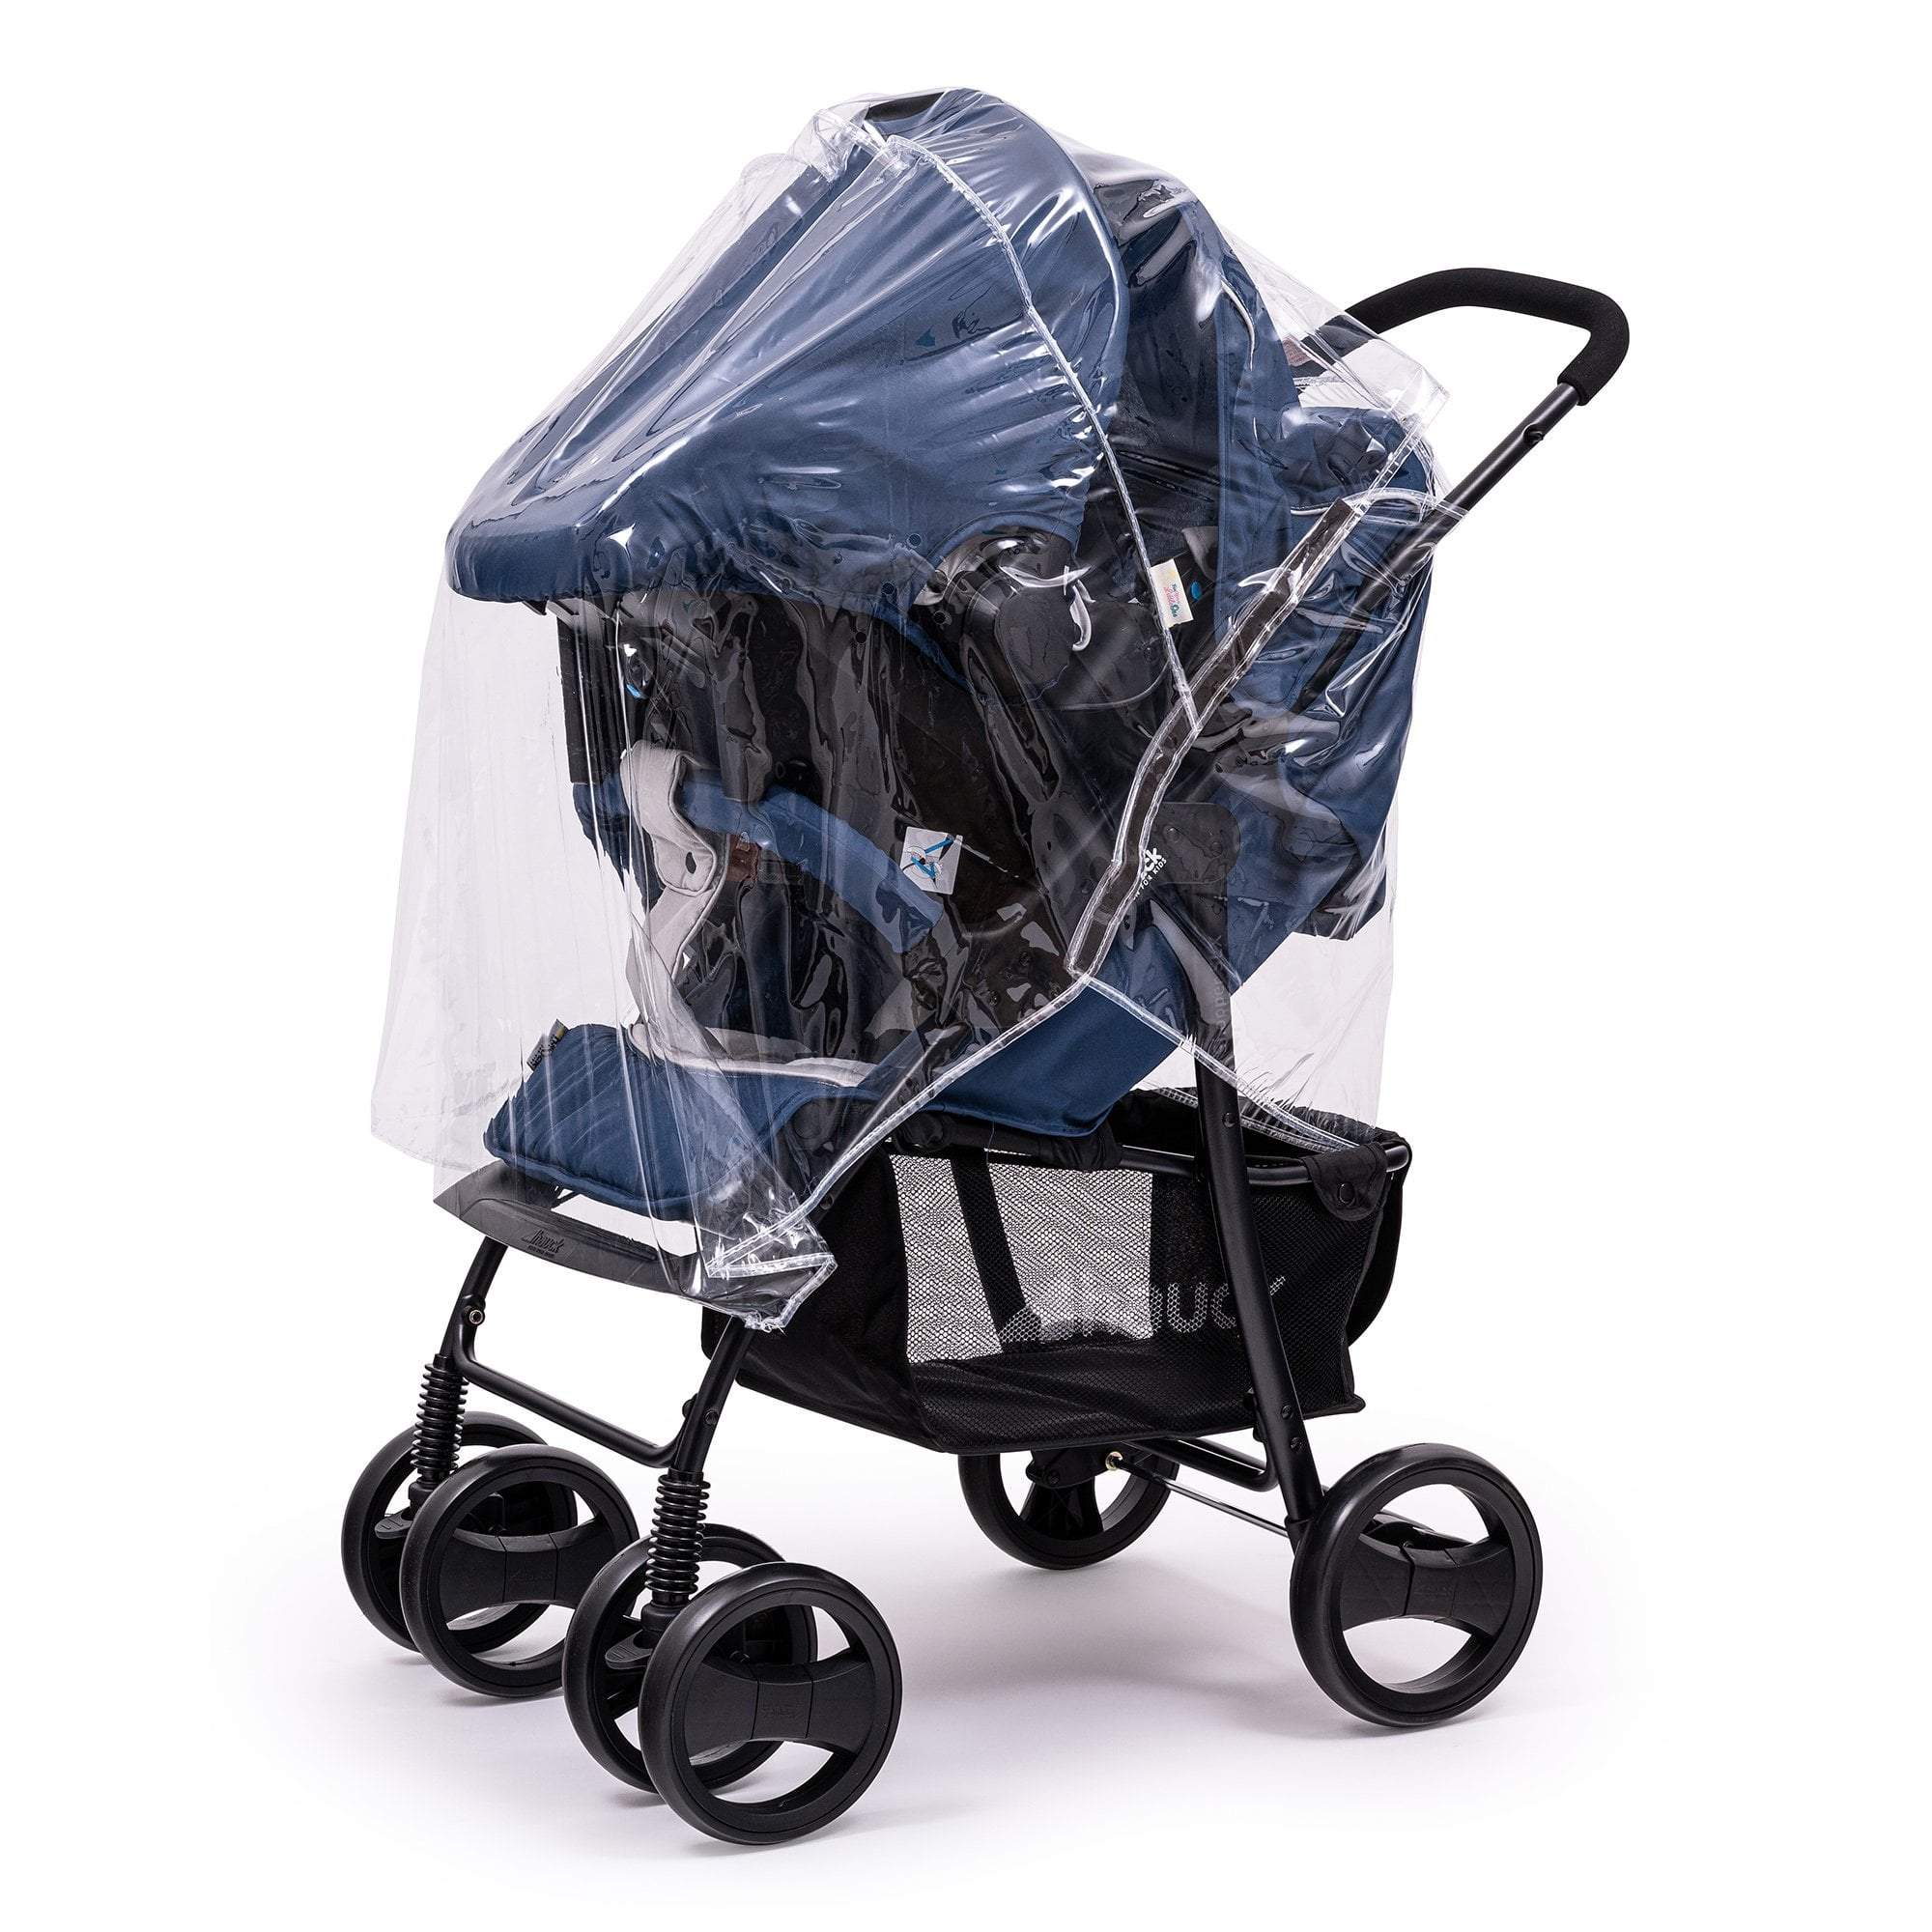 Travel System Raincover Compatible with Chicco - Fits All Models - For Your Little One